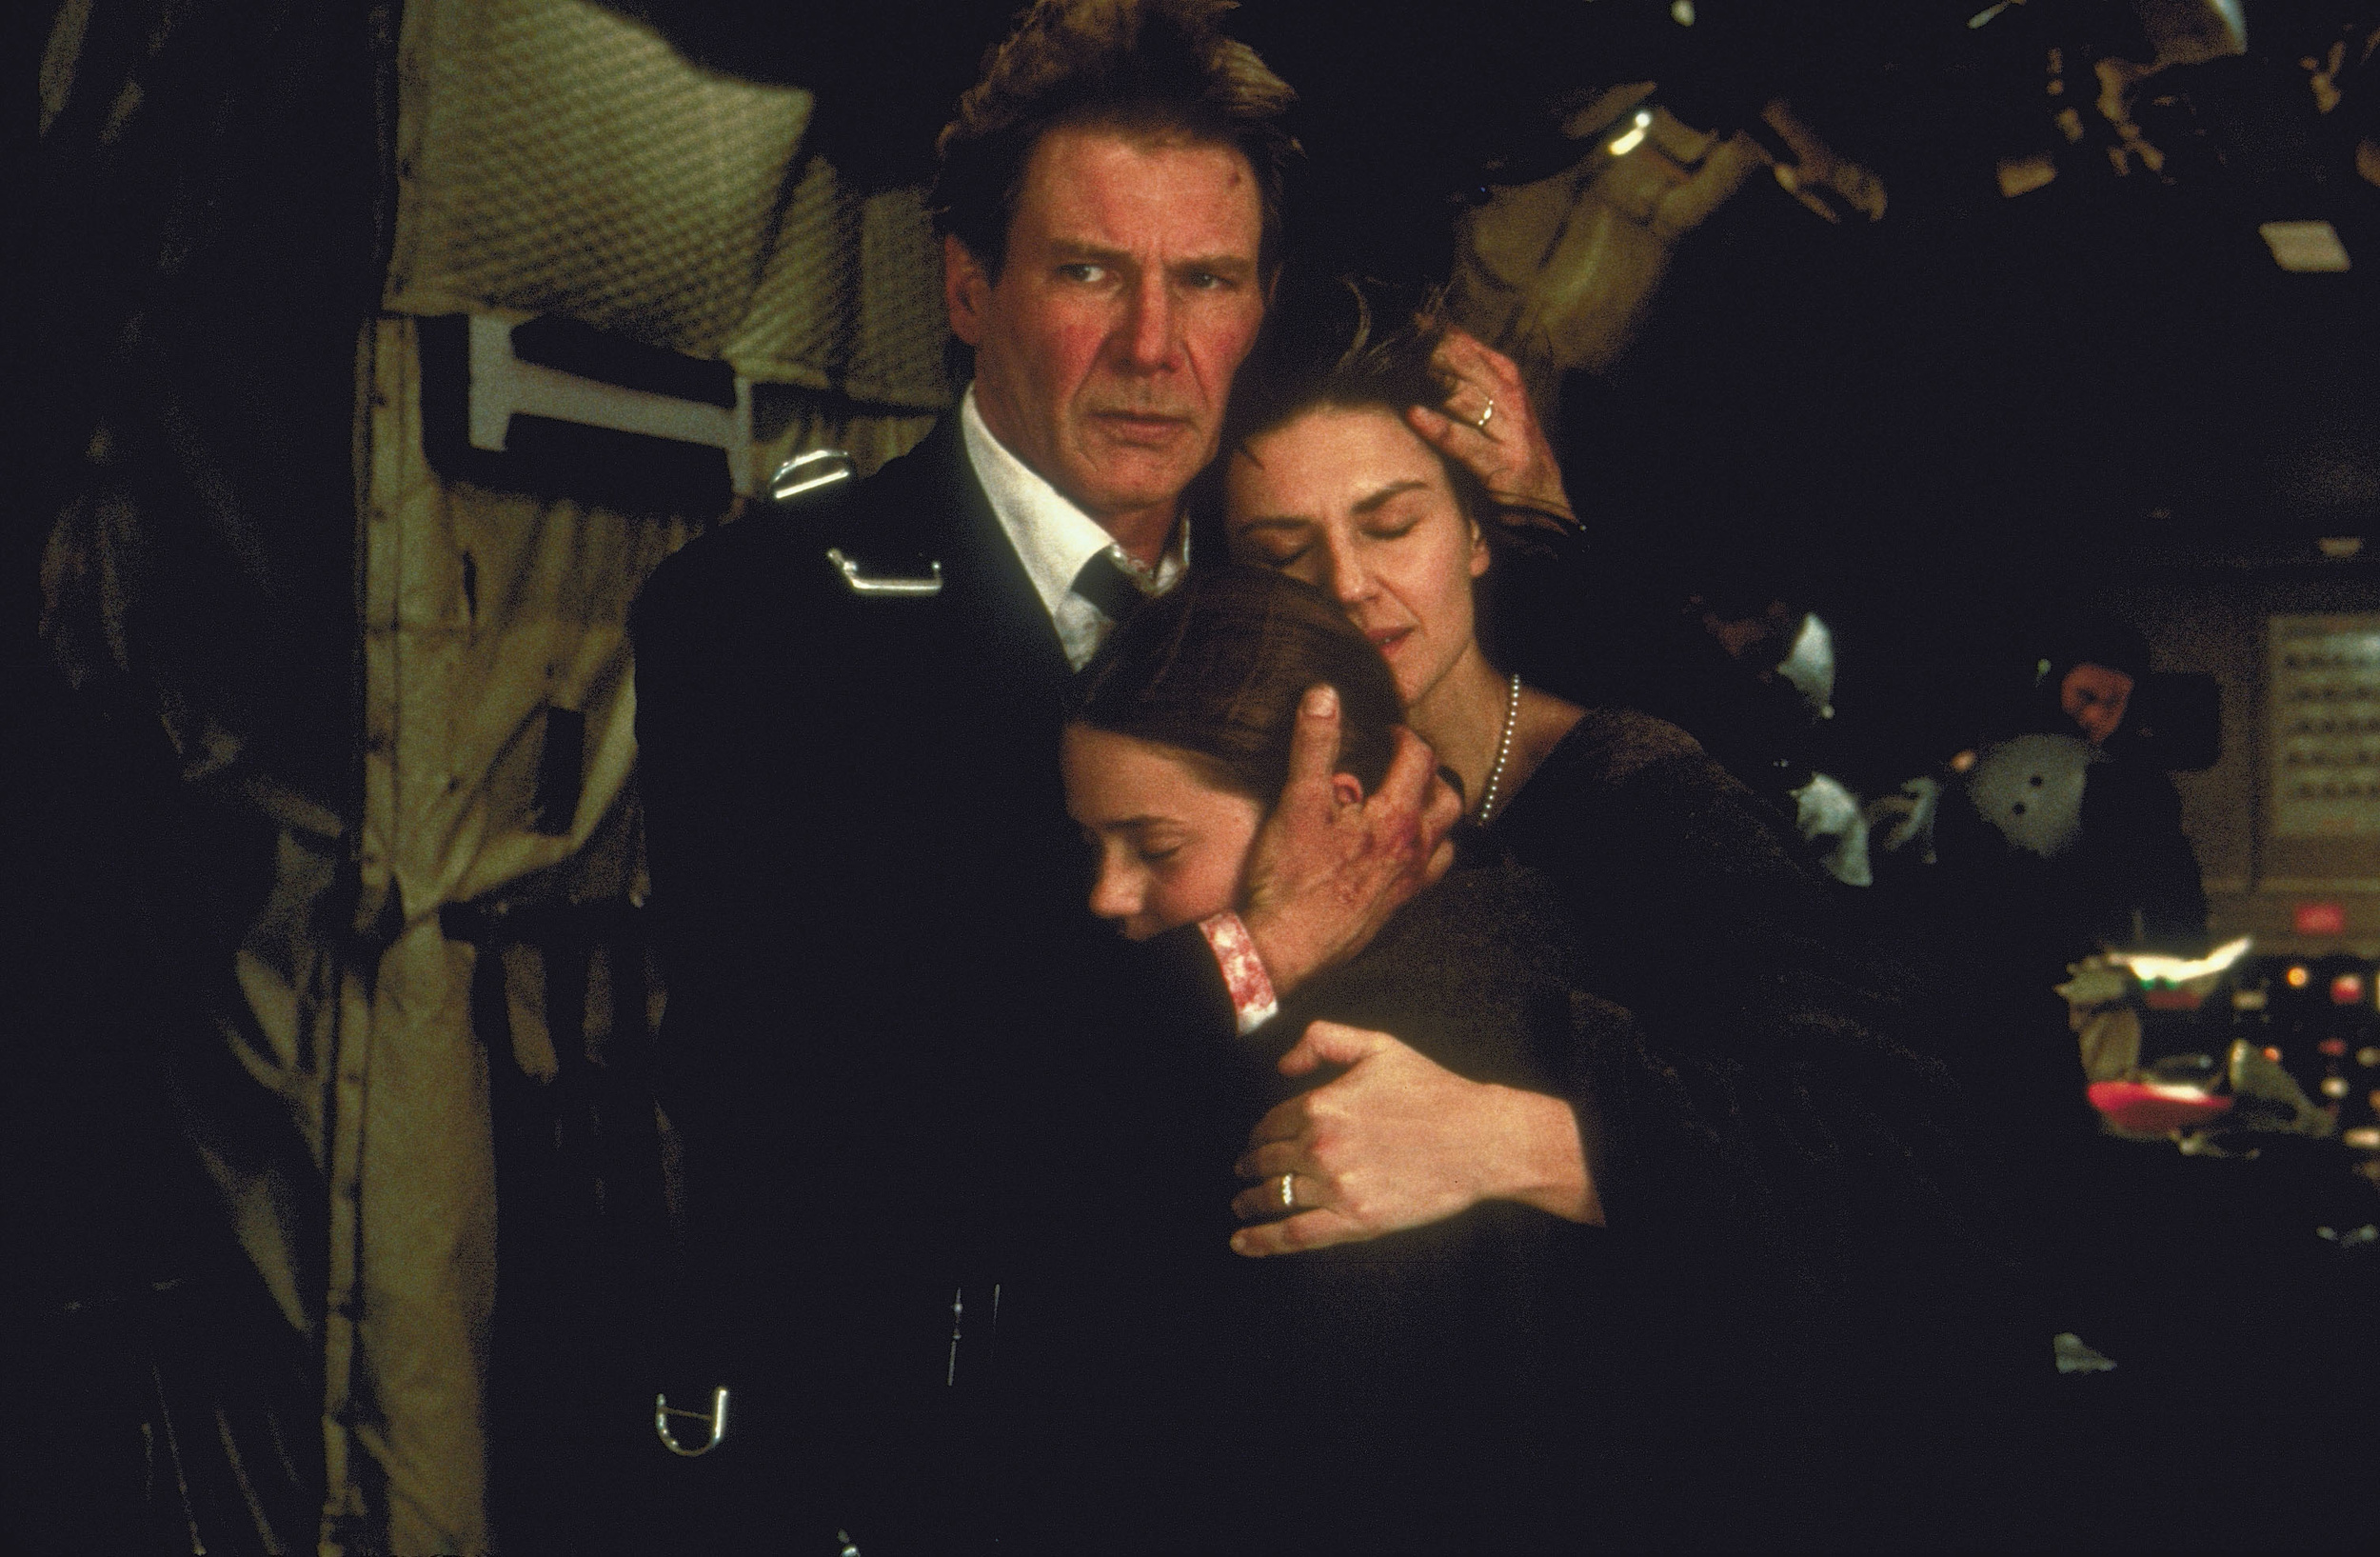 <p>“Get off my plane!” With those words, Harrison Ford’s President James Marshall became an action movie icon. “Air Force One” isn’t the best ‘90s political action flick, but <a href="https://www.yardbarker.com/entertainment/articles/20_facts_you_might_not_know_about_air_force_one/s1__37717559" rel="noopener noreferrer">it is a fun one</a>. Terrorists get on the President’s plane, and he’s left to try and thwart them.</p><p><a href='https://www.msn.com/en-us/community/channel/vid-cj9pqbr0vn9in2b6ddcd8sfgpfq6x6utp44fssrv6mc2gtybw0us'>Follow us on MSN to see more of our exclusive entertainment content.</a></p>